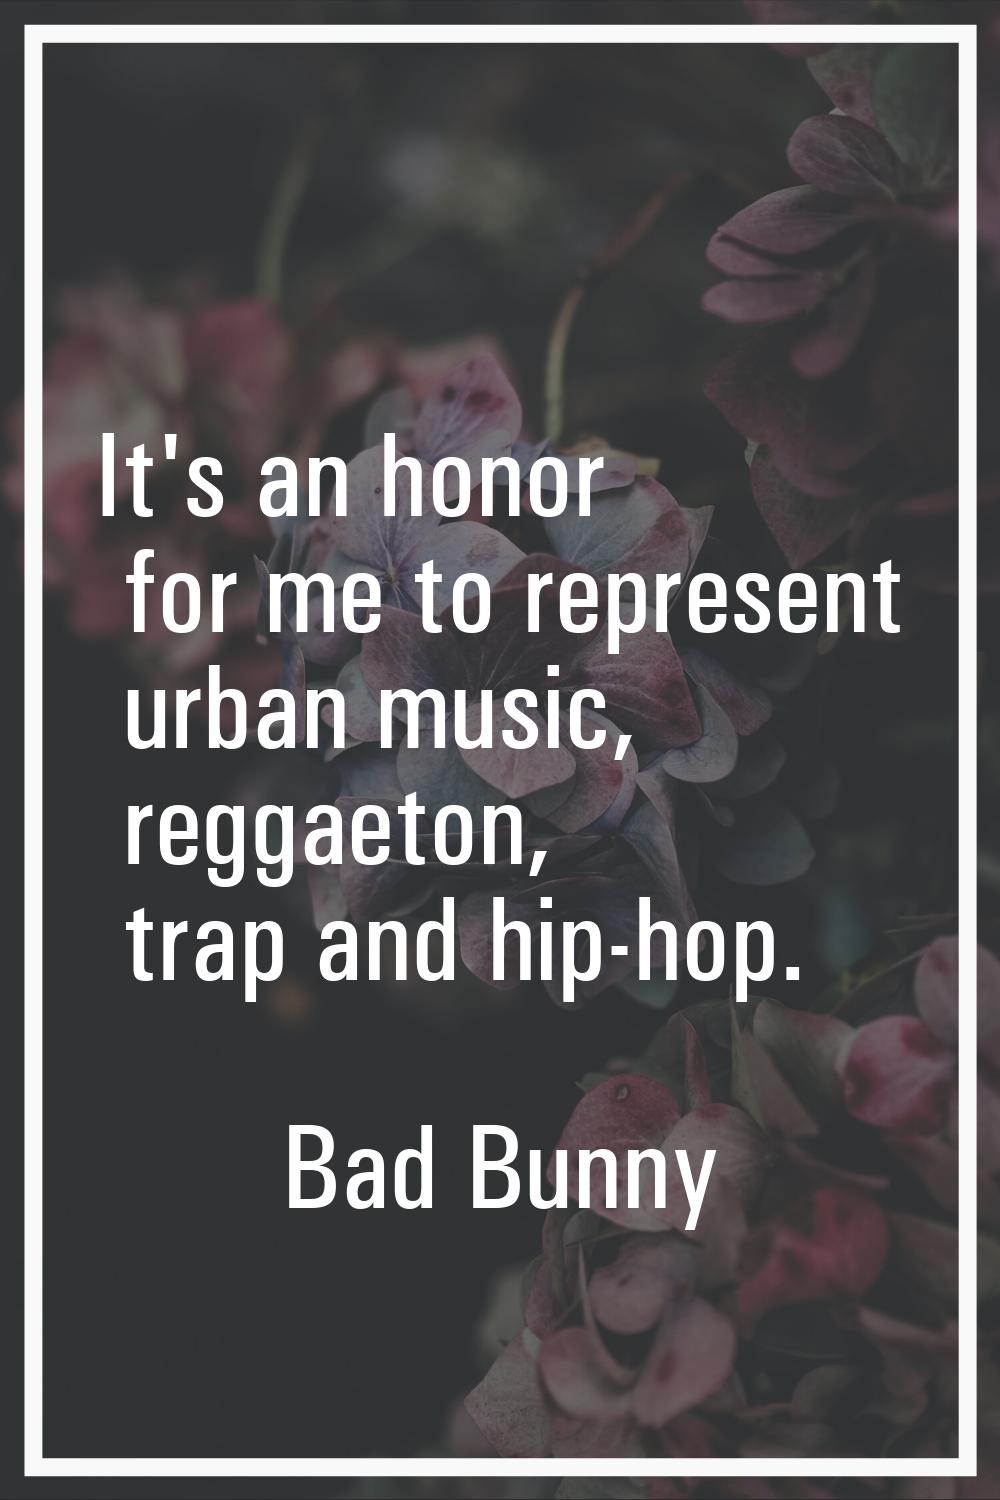 It's an honor for me to represent urban music, reggaeton, trap and hip-hop.